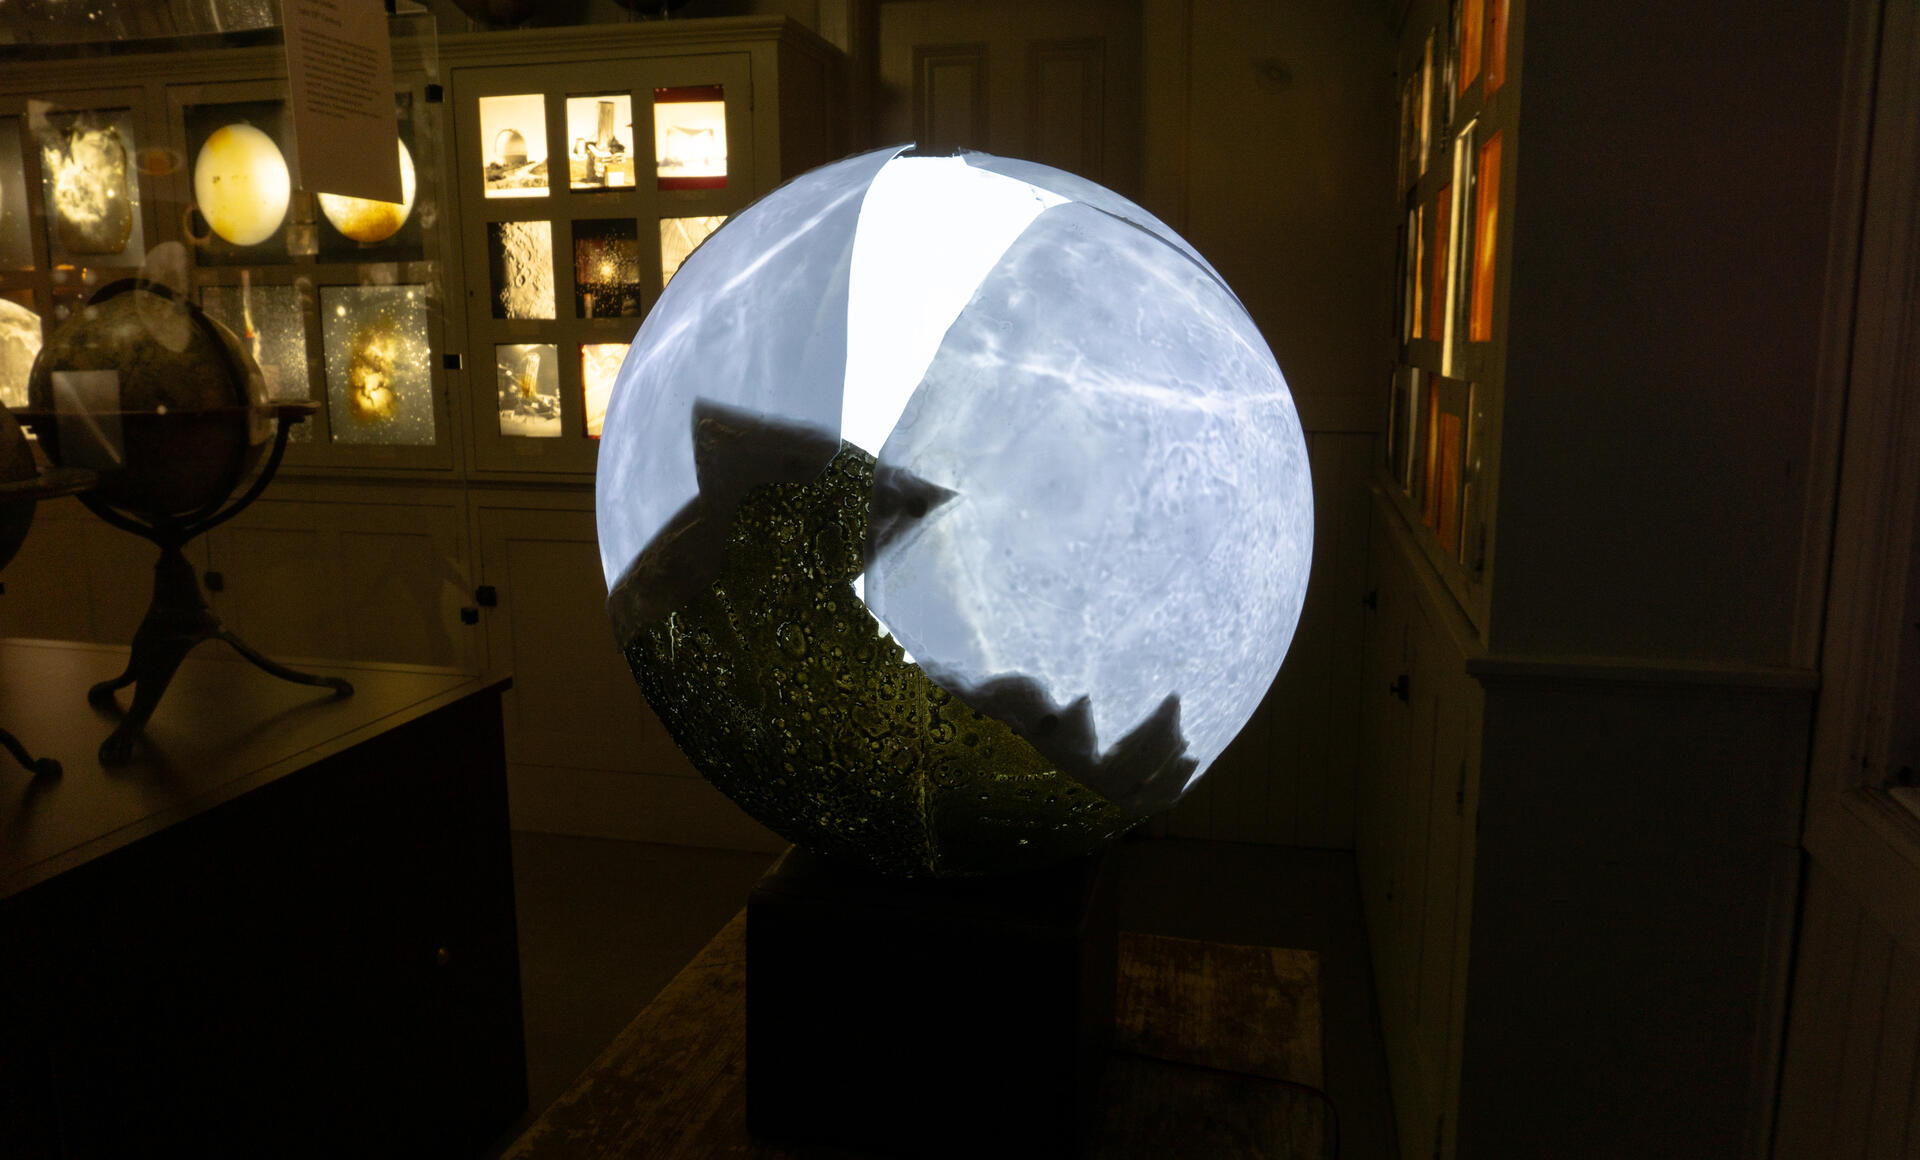 A broken moon model made by the Soviet Union is repaired by projecting from the glass ball inside onto the plastic shell.